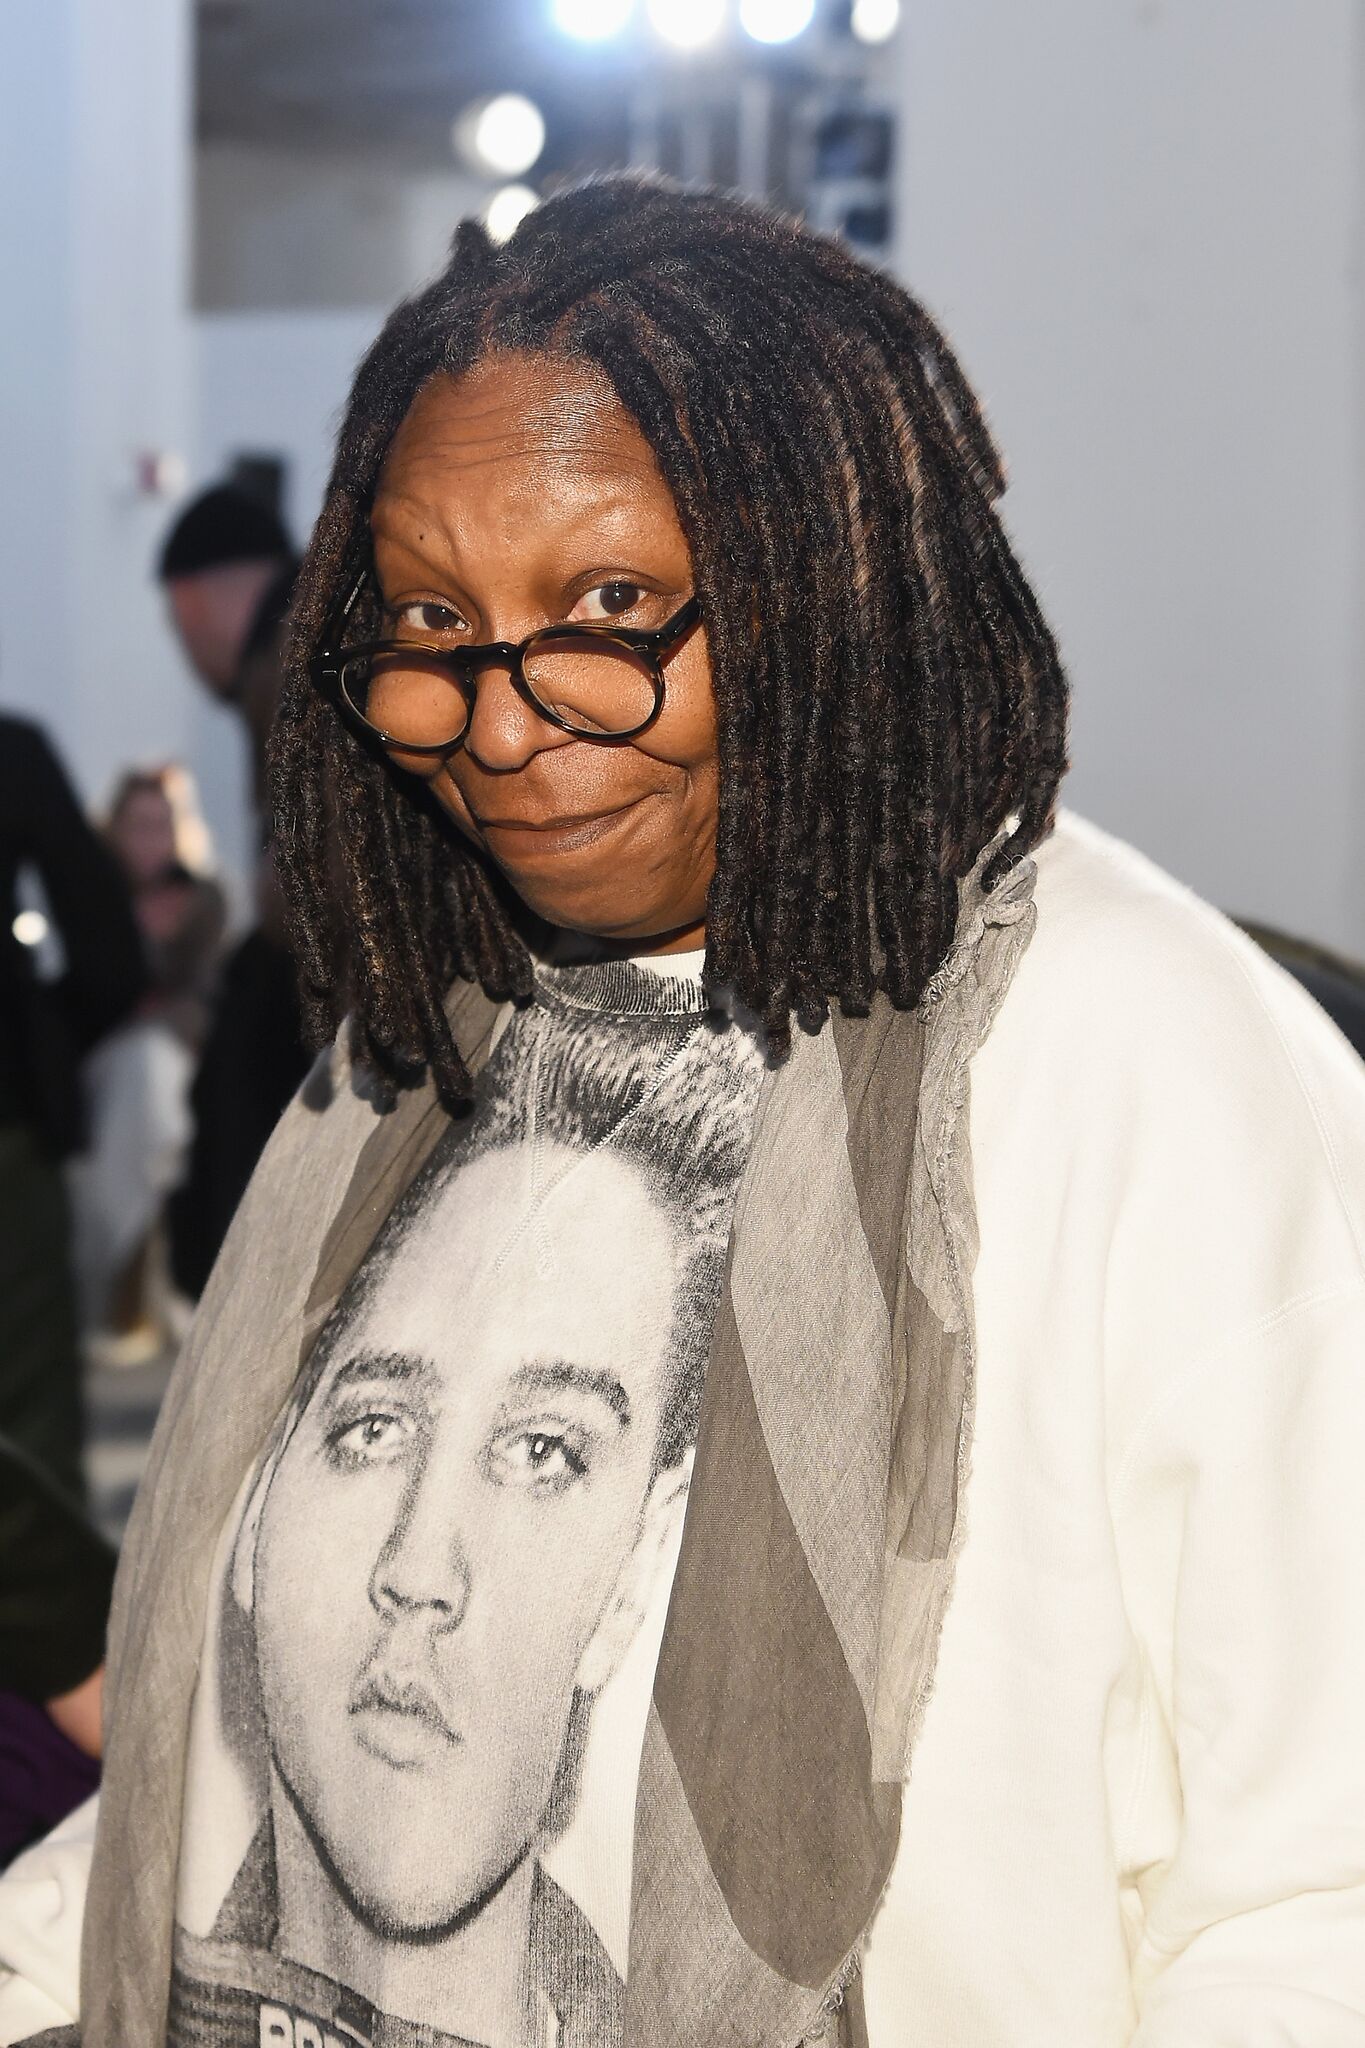 Actress Whoopi Goldberg attends the R13 fashion show during New York Fashion Week on February 10, 2018 | Photo: Getty Images